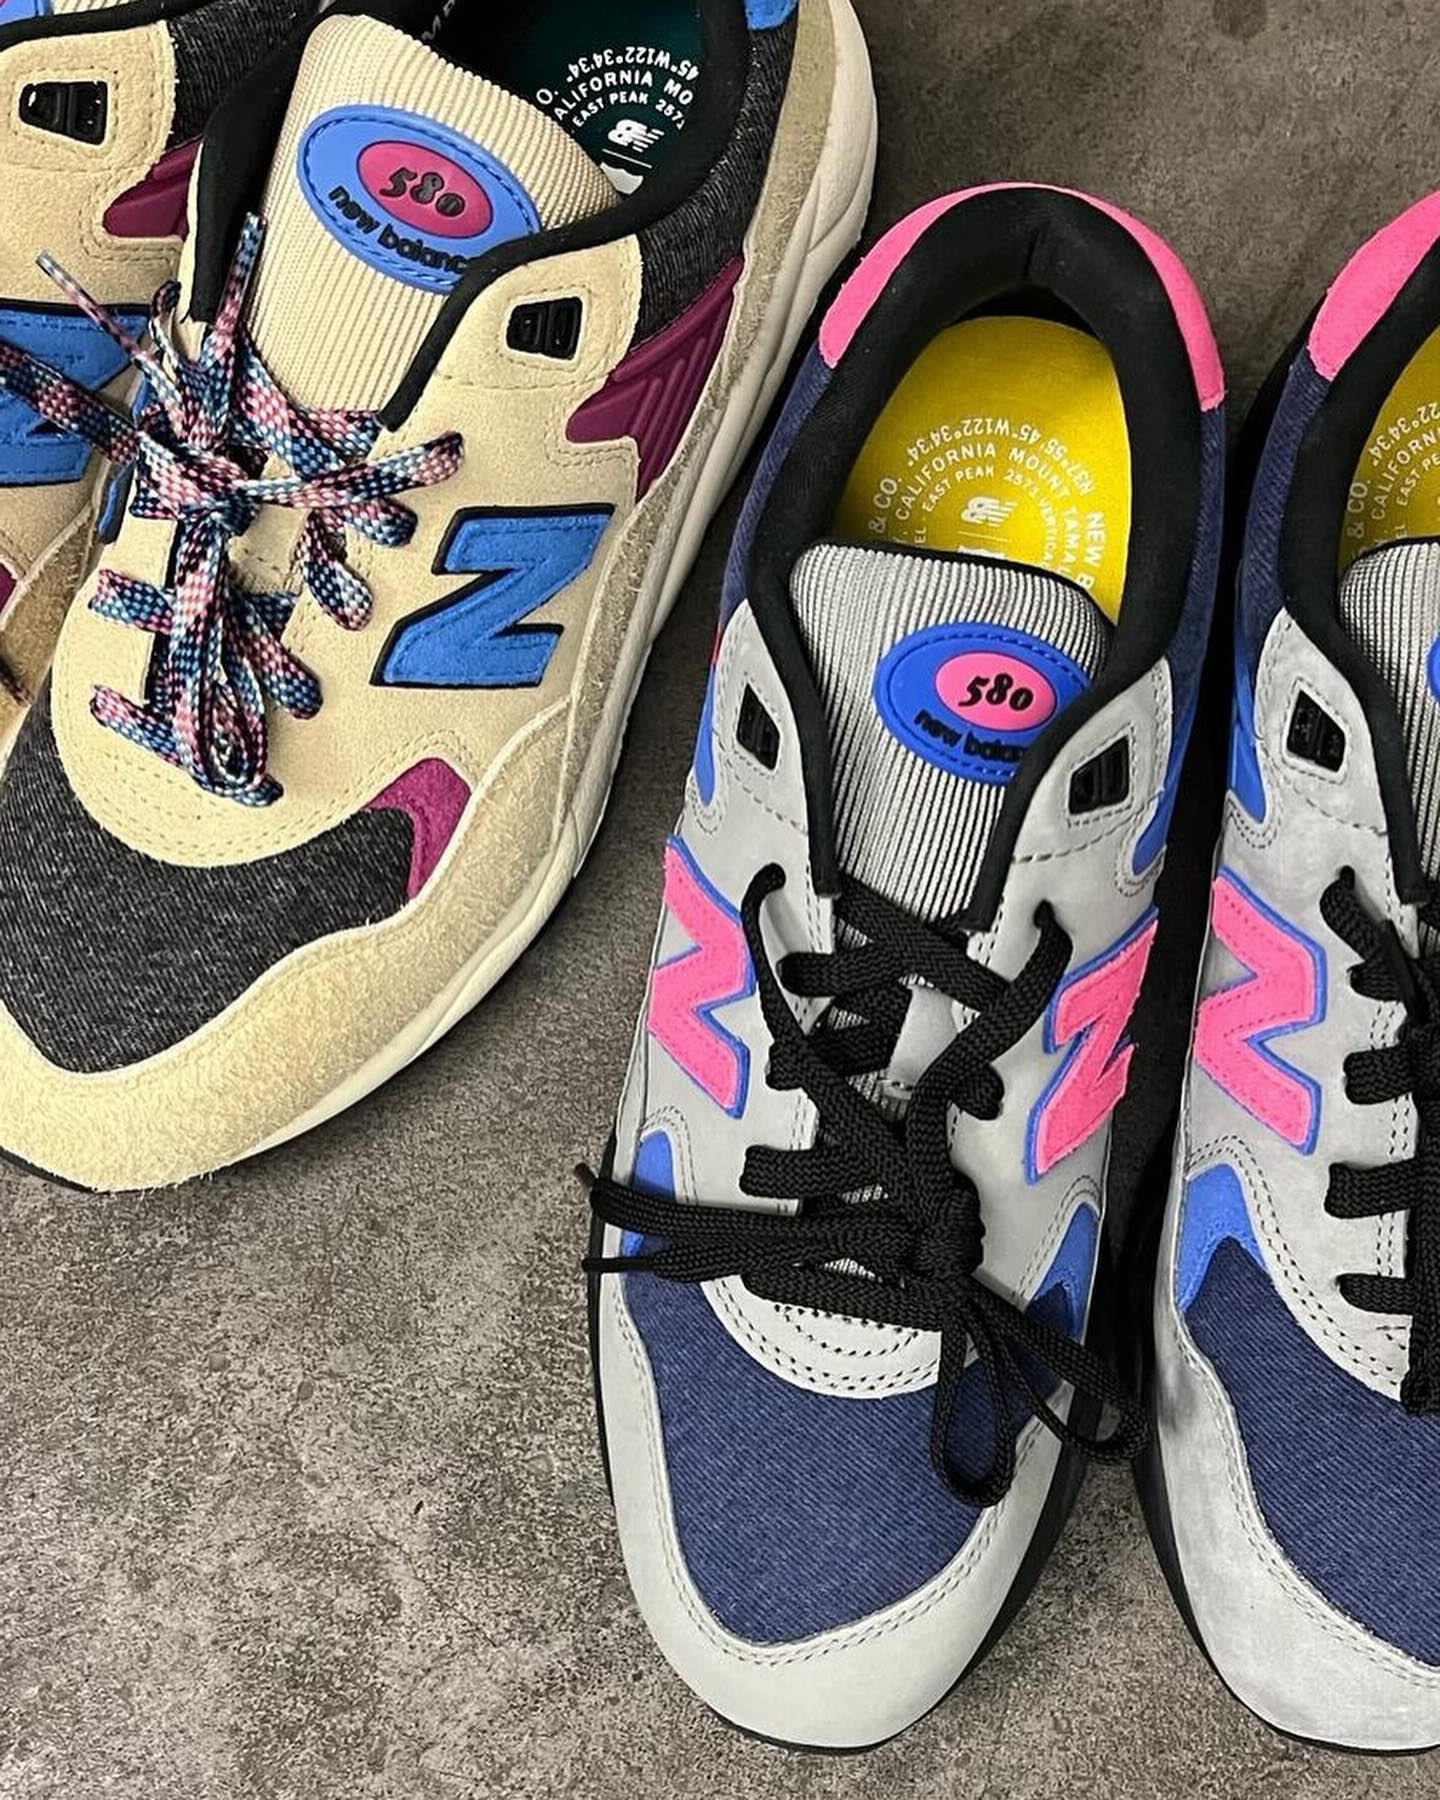 Levi's To Drop Colorful New Balance 580 Sneakers